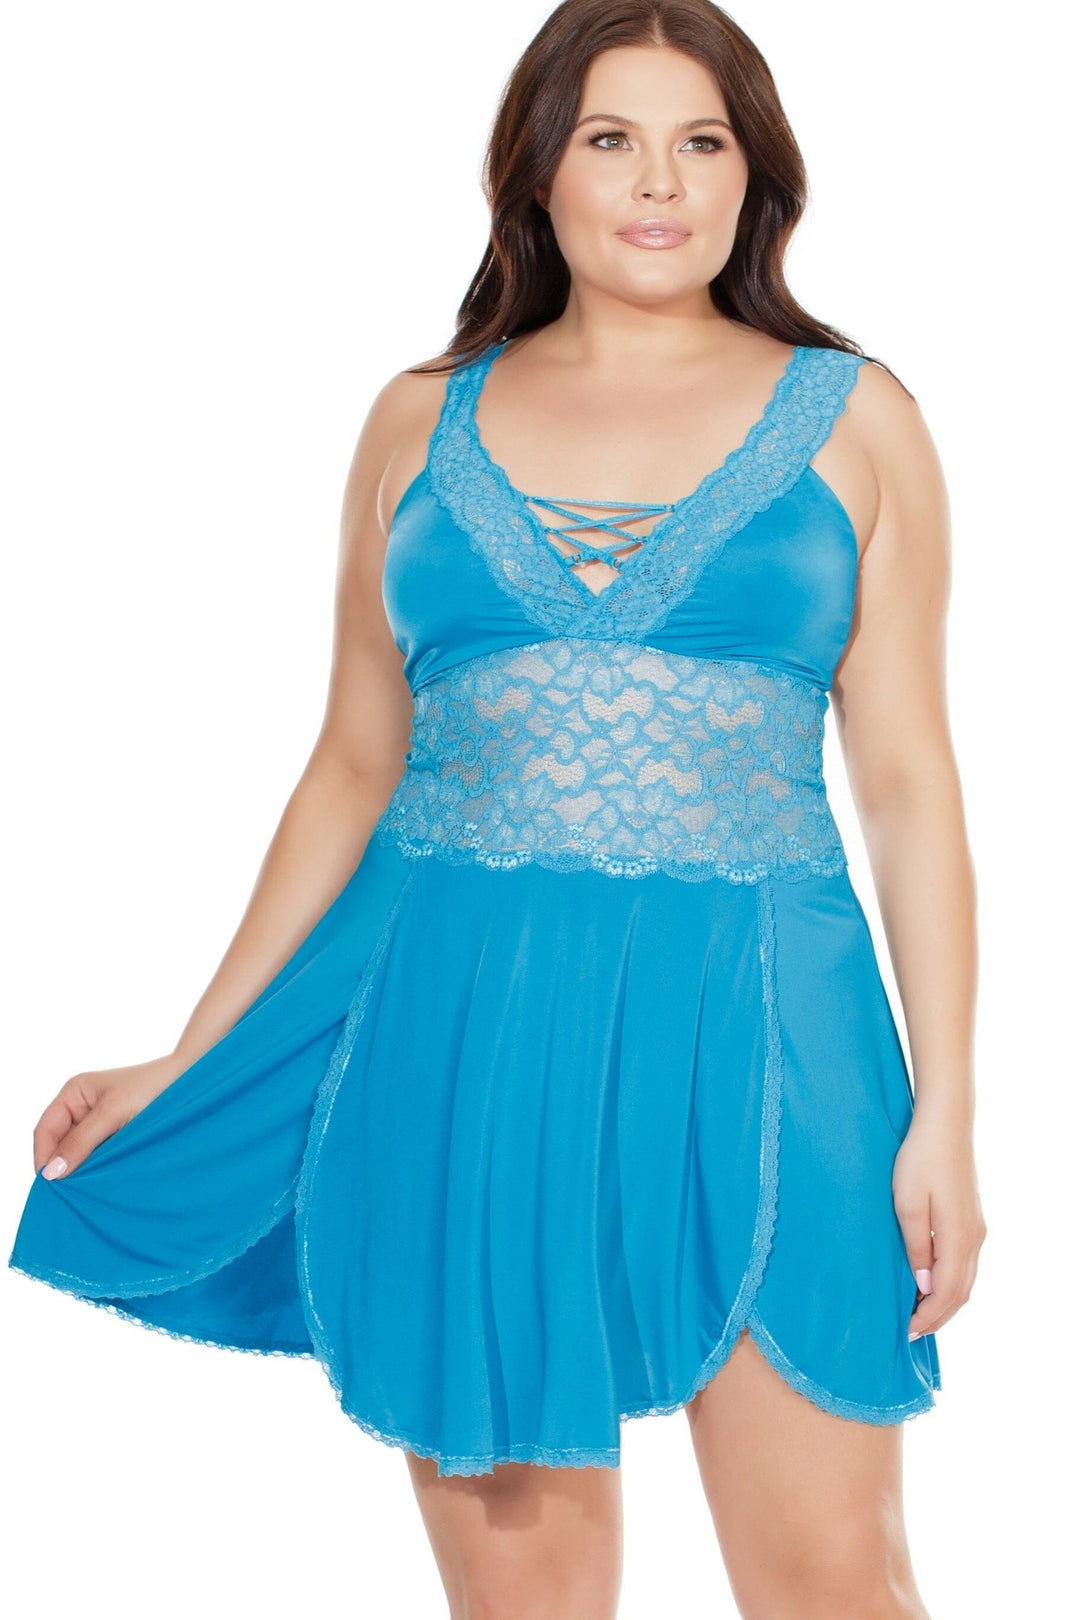 Soft Cup Babydoll With Side Slits | Plus Size-Babydolls-Coquette-Blue-Q-SEXYSHOES.COM